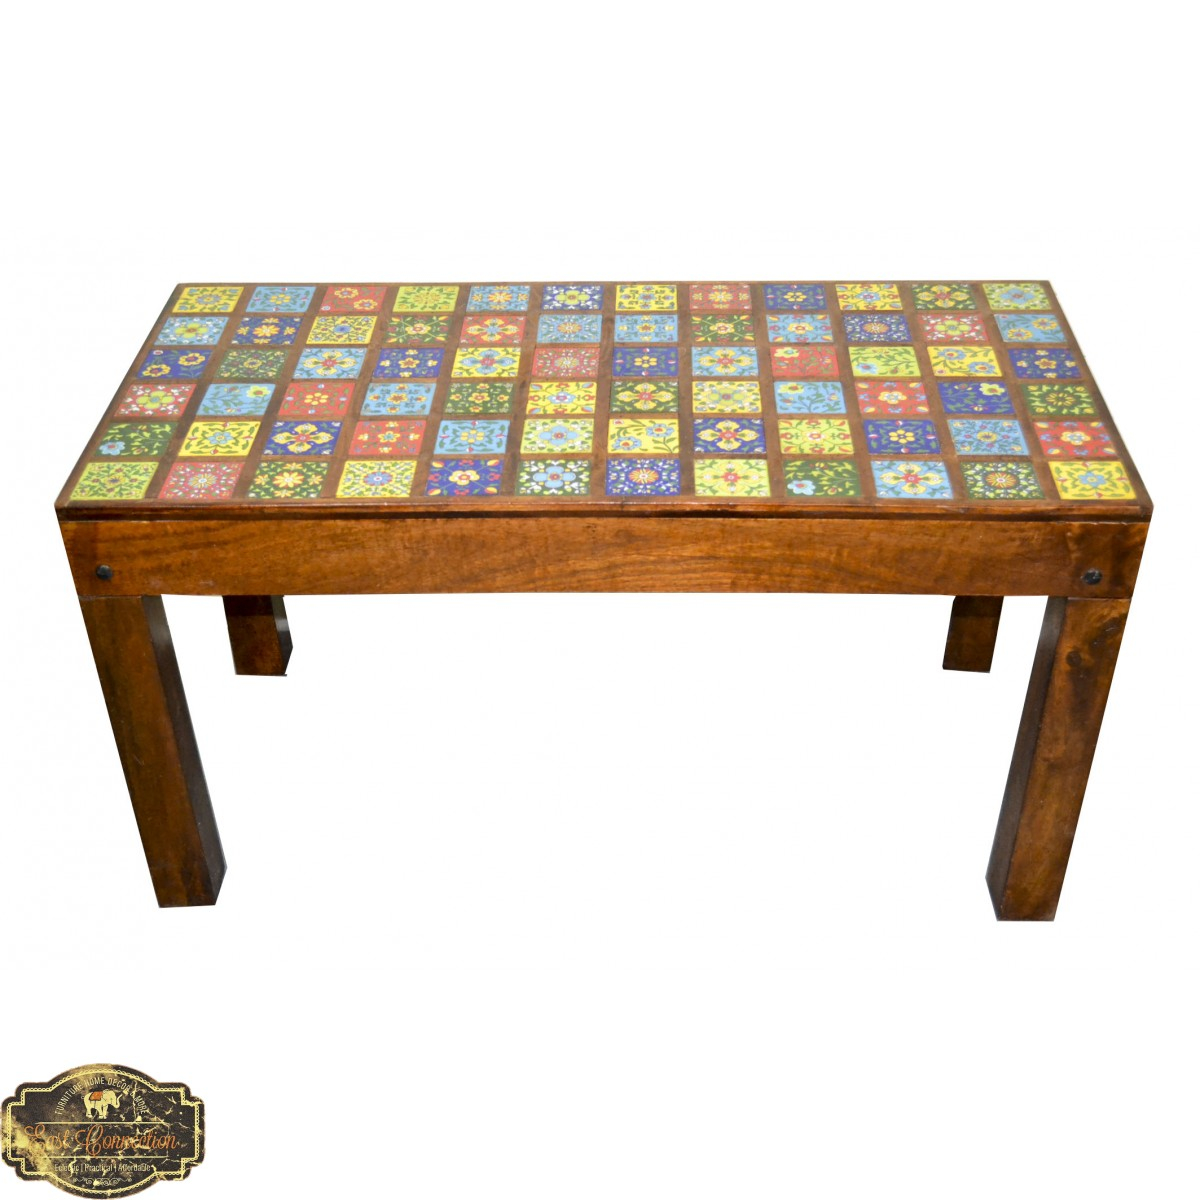 Moroccan Tile Coffee Table throughout sizing 1200 X 1200